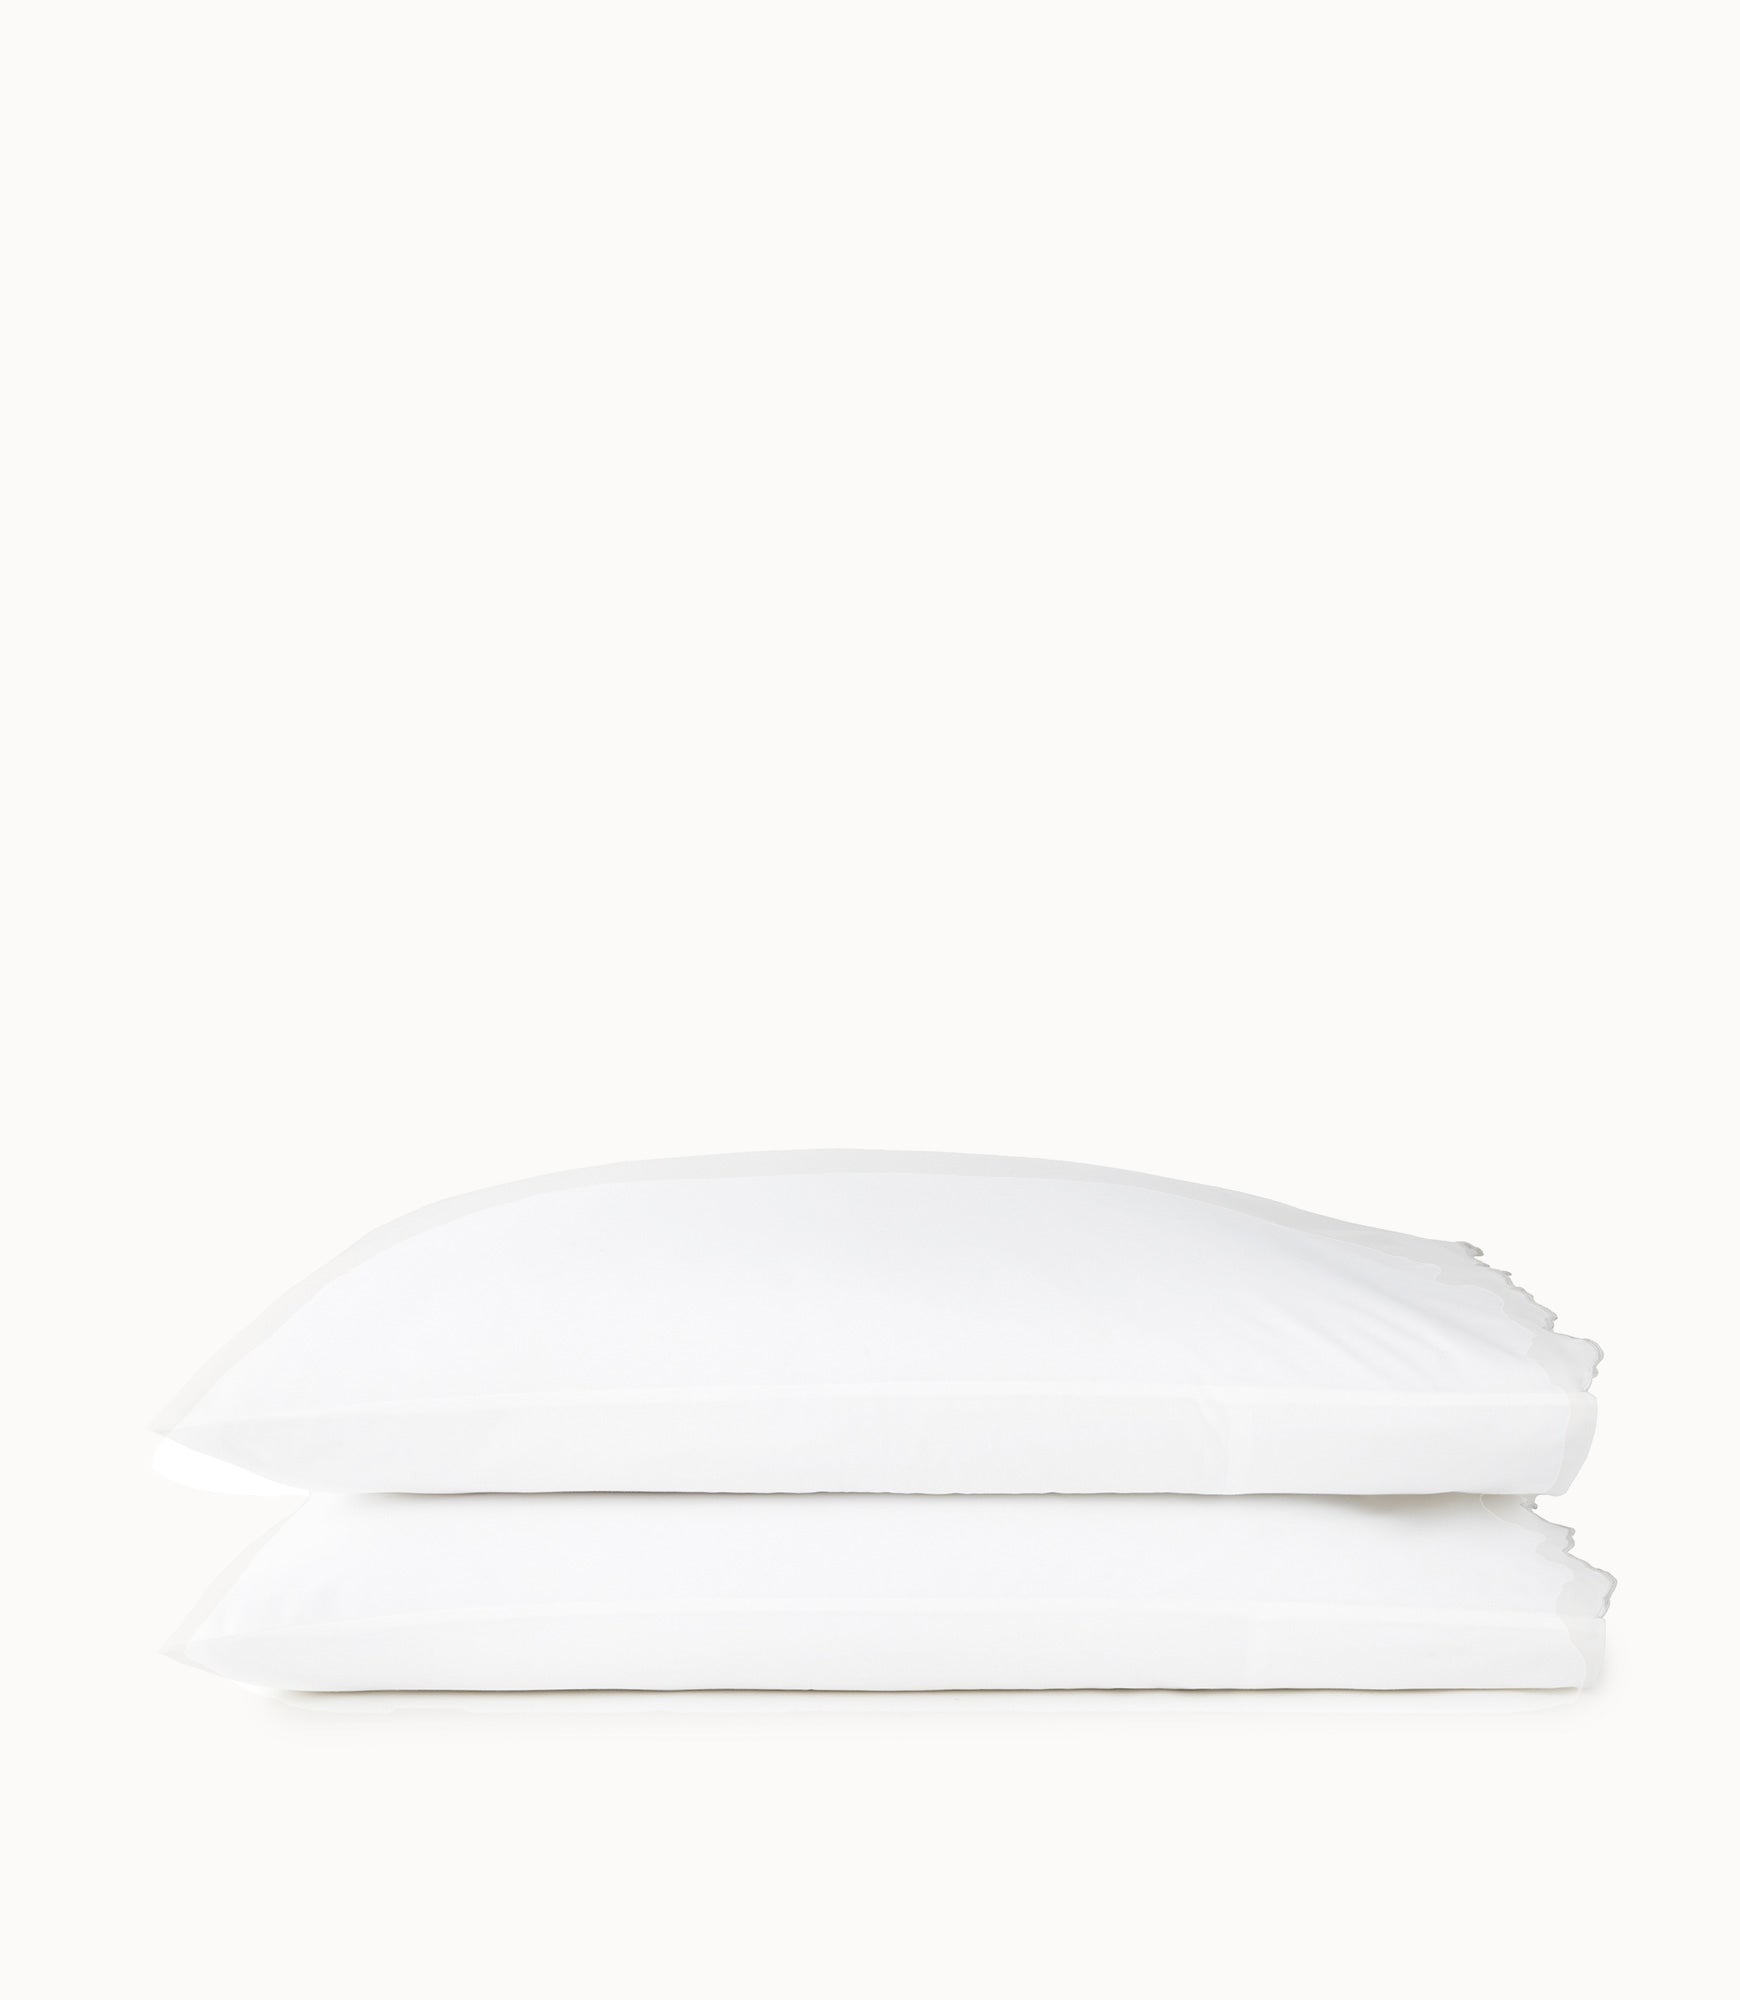 Urban Scallop Pillow Cases stacked Fog